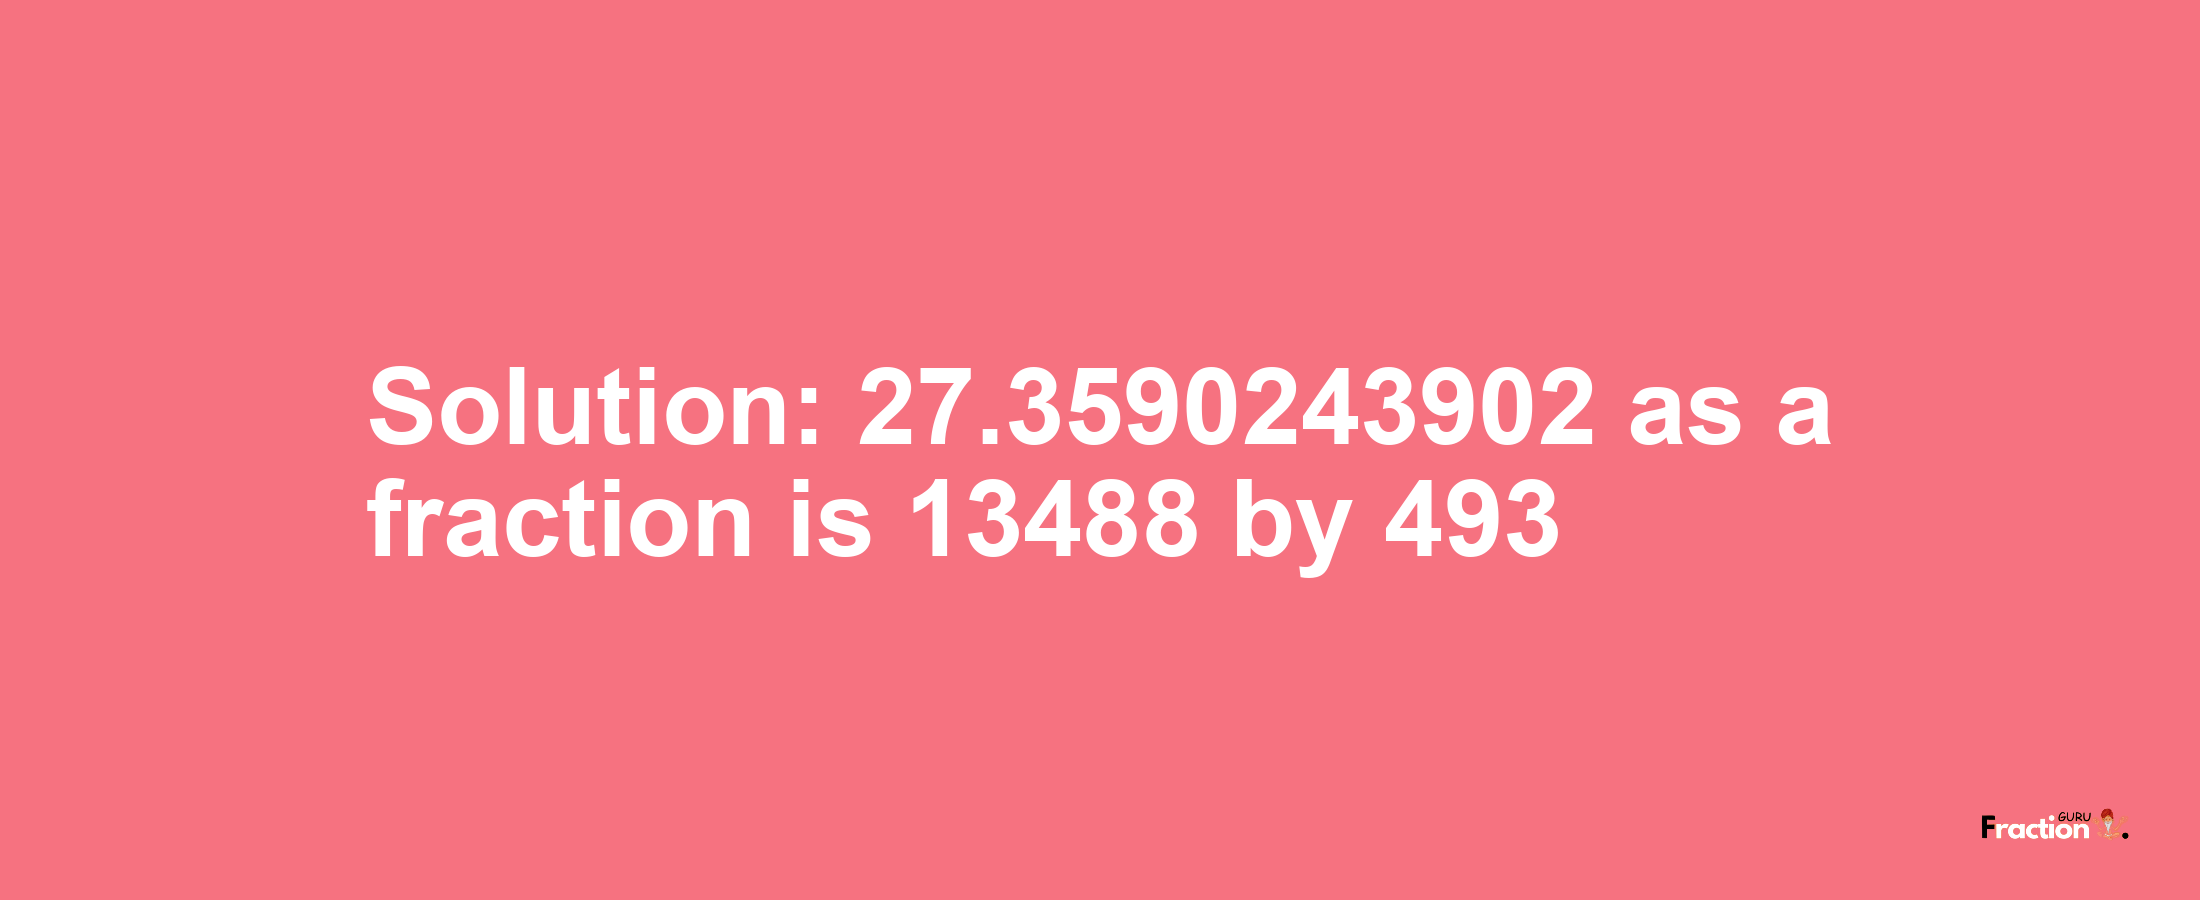 Solution:27.3590243902 as a fraction is 13488/493